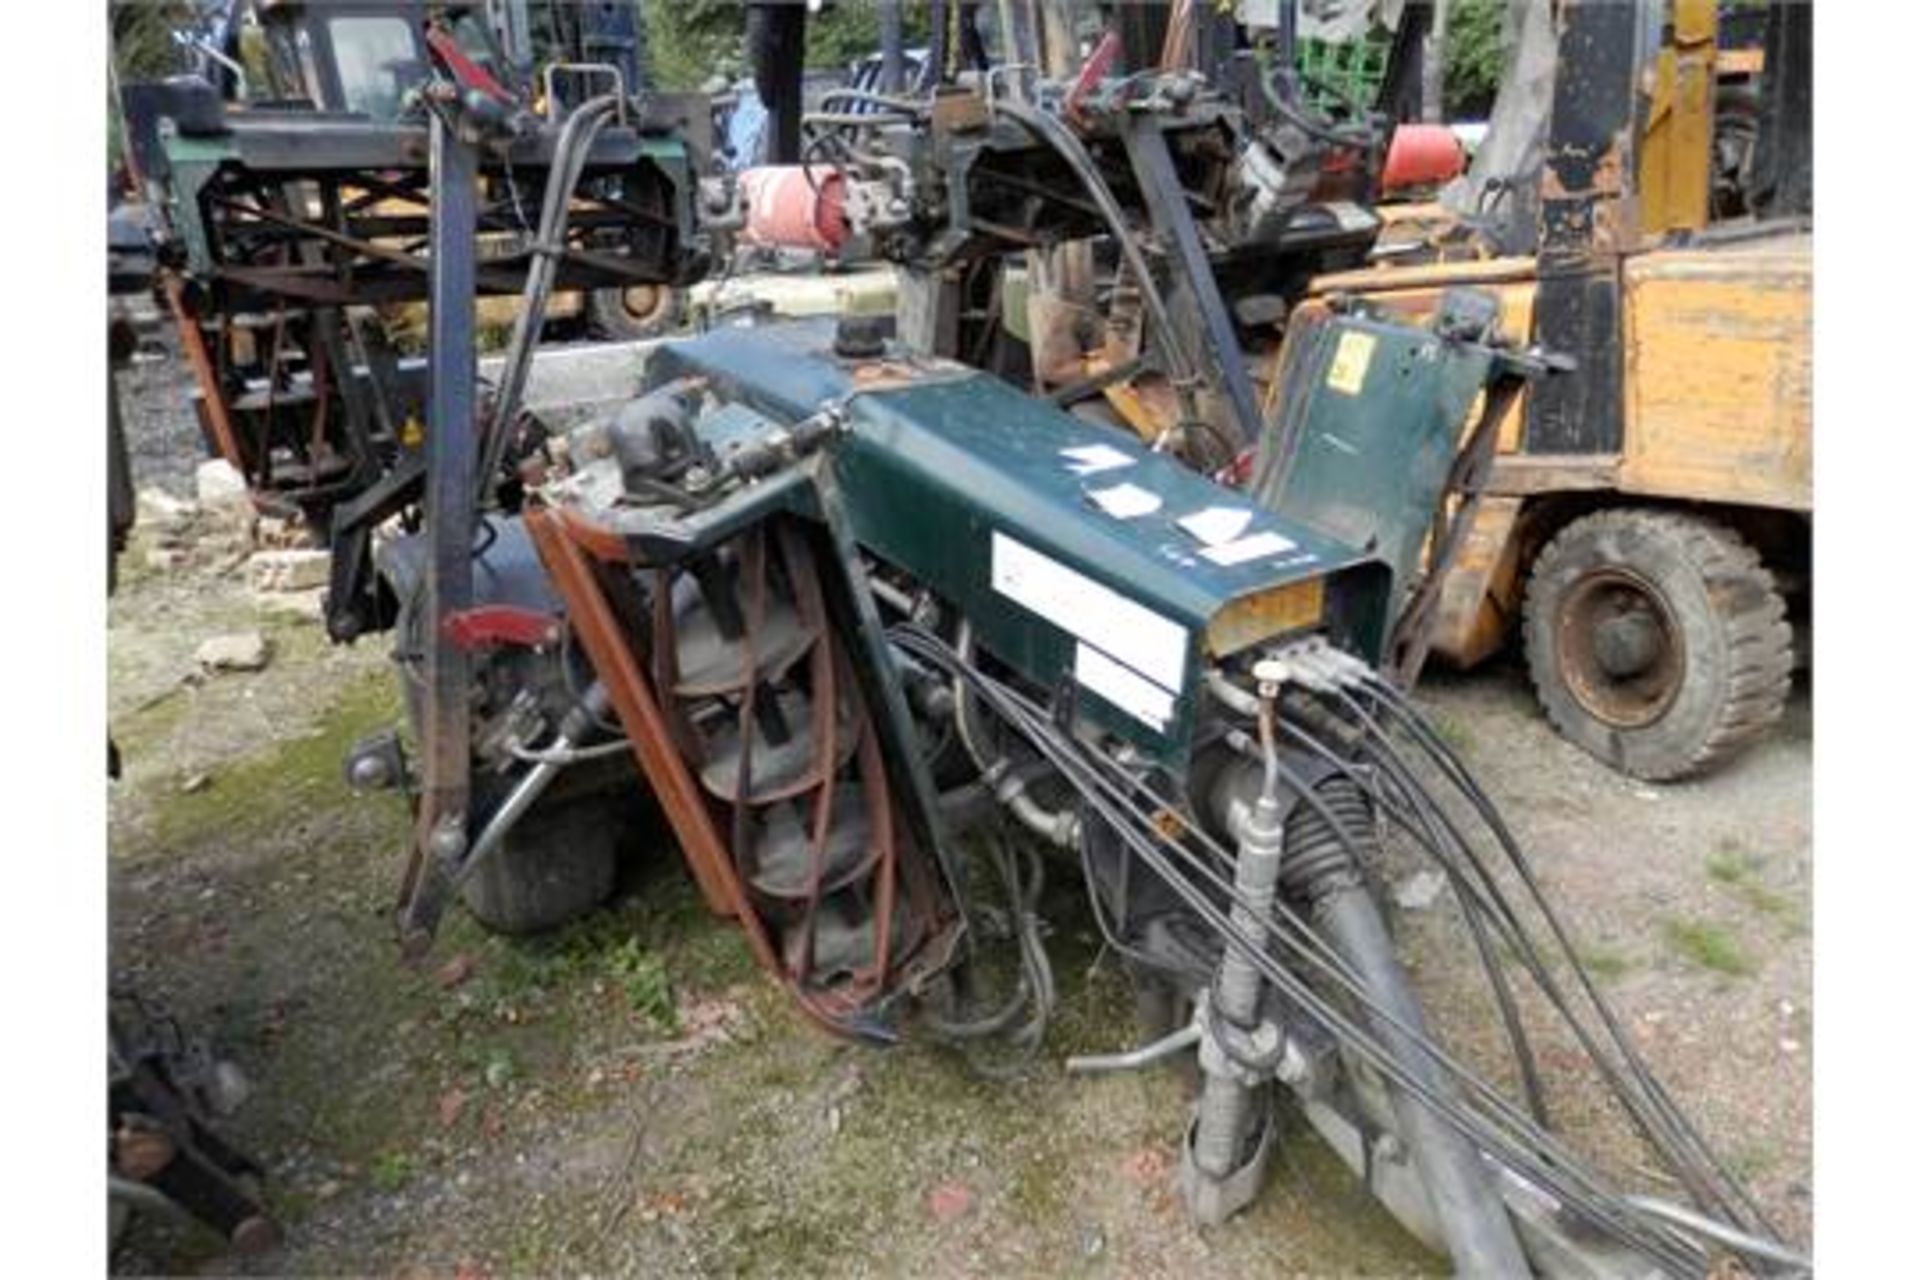 2008 HAYTER TM749 TRAILERED 7 GANG MOWER. WORKING UNIT. COST APPROX £27,000 WHEN NEW. - Image 6 of 7